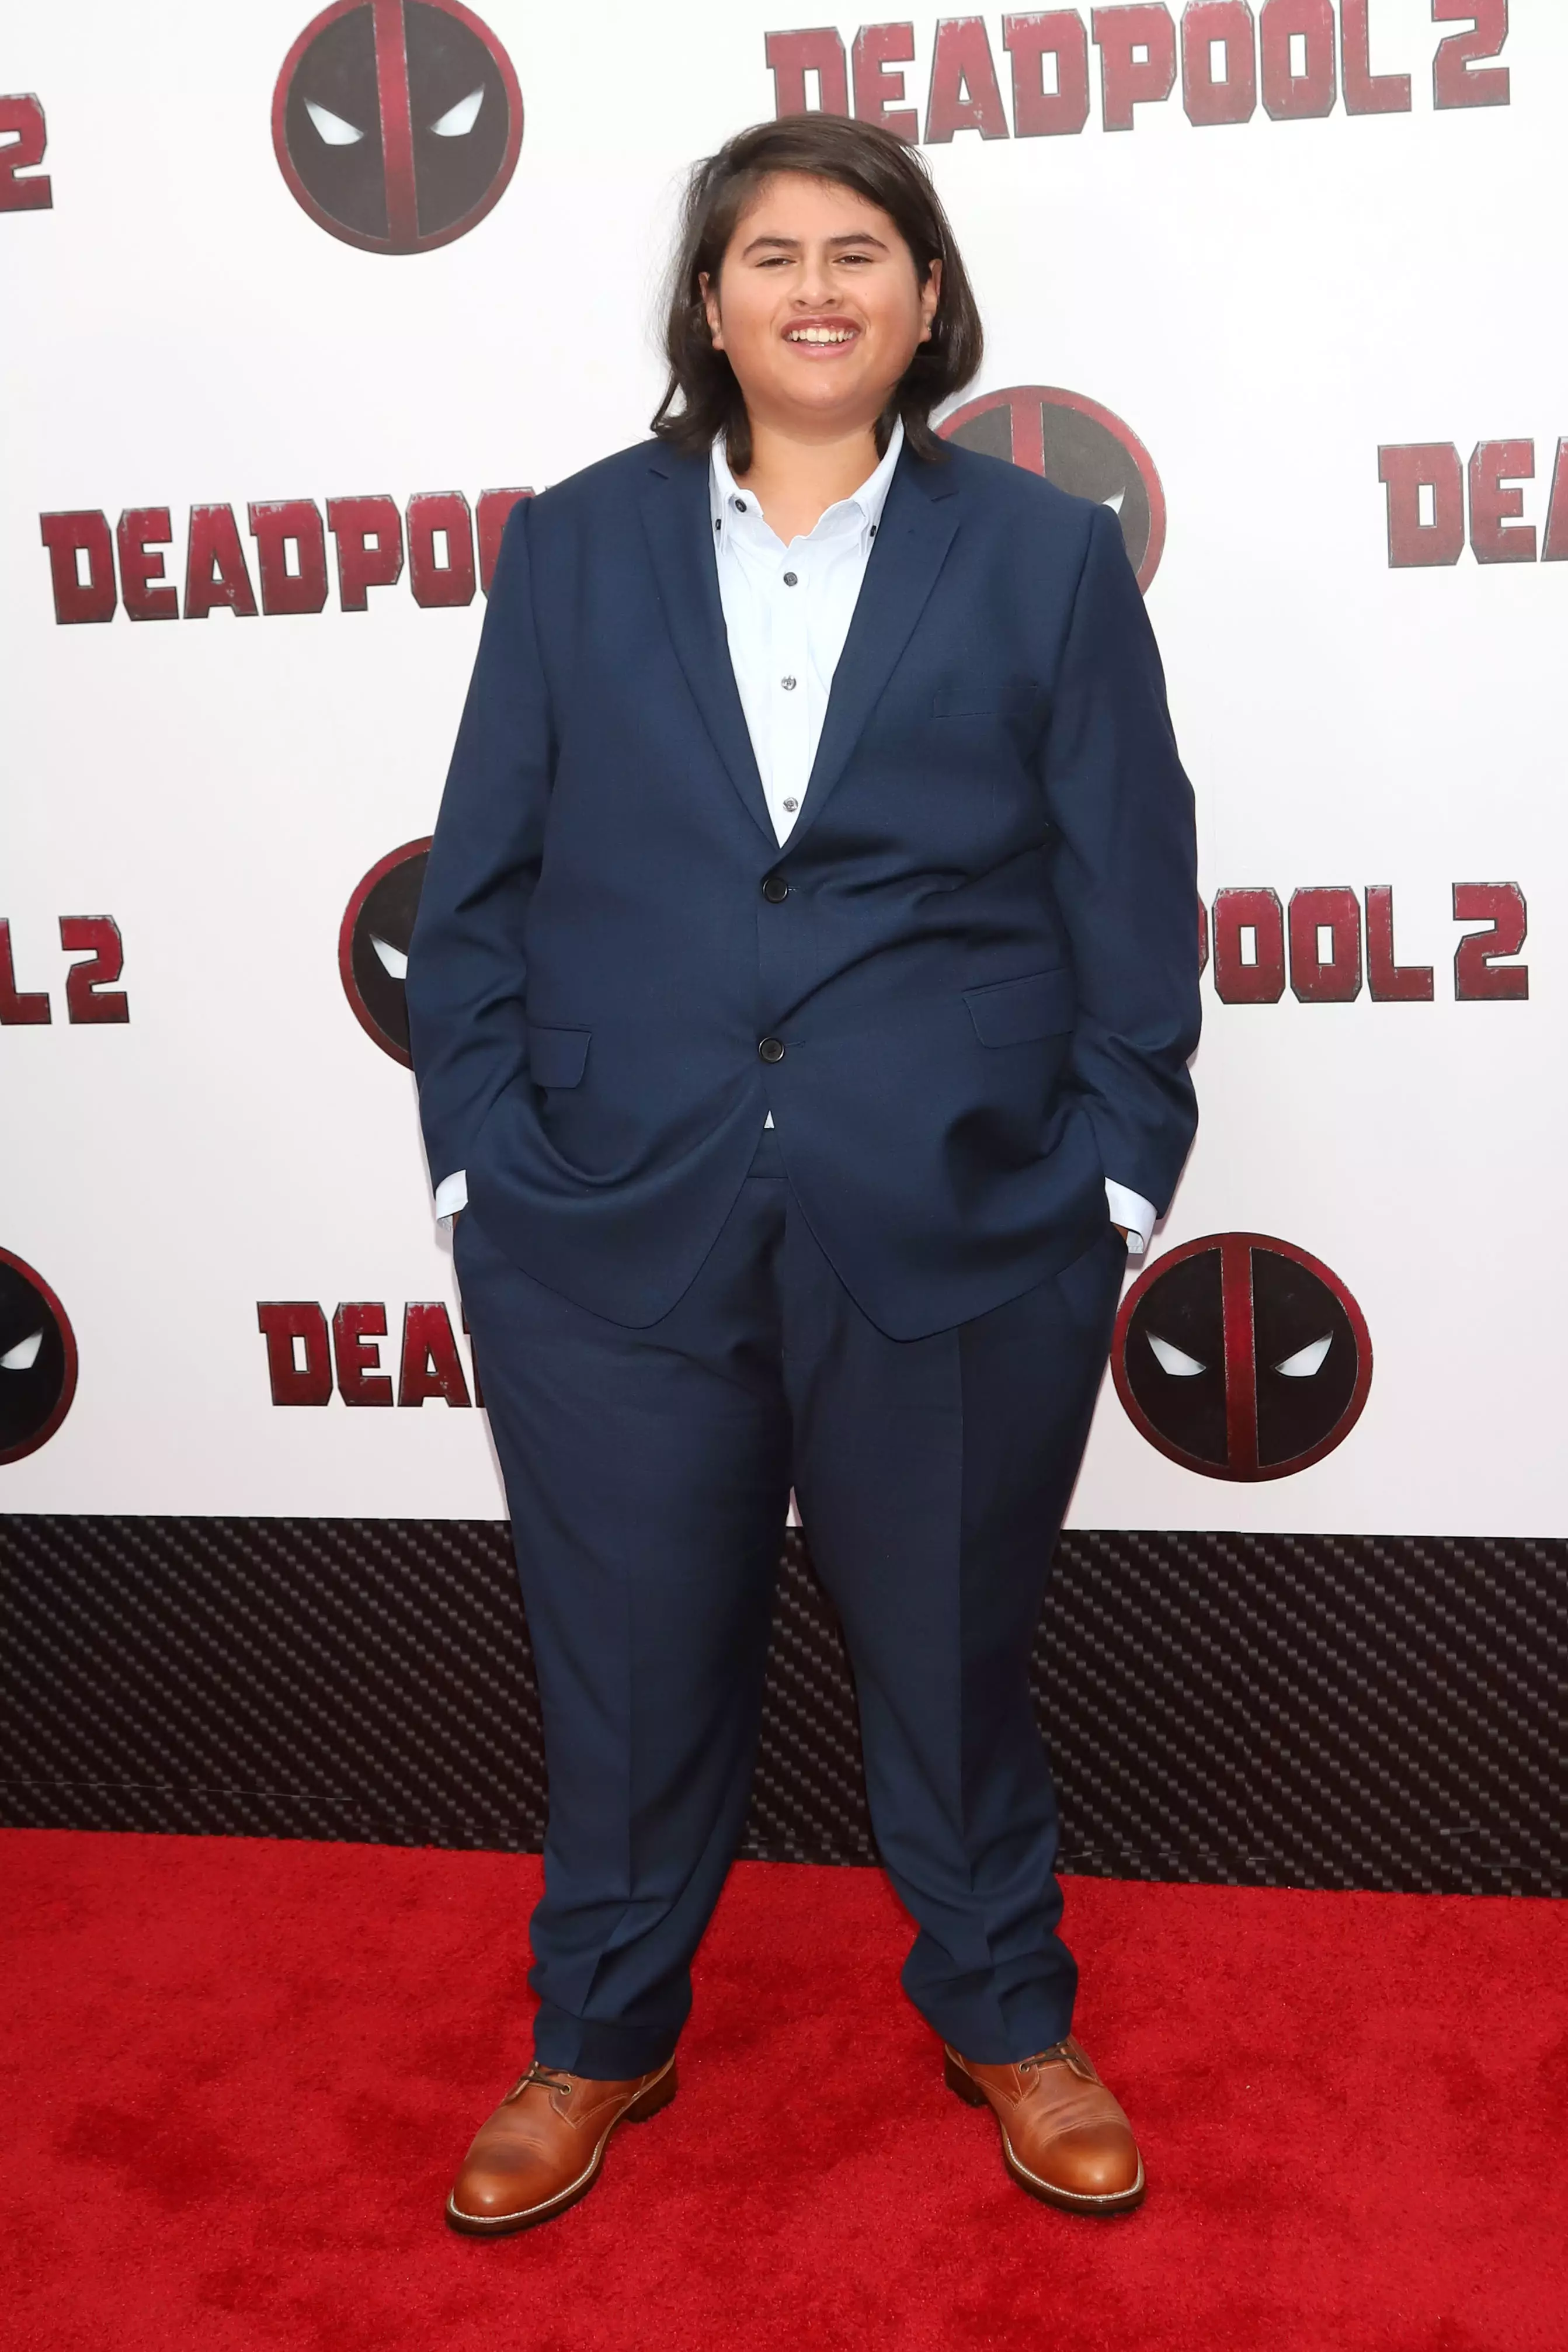 Julian Dennison will play a magical troublemaker named Belsnickel in the sequel (